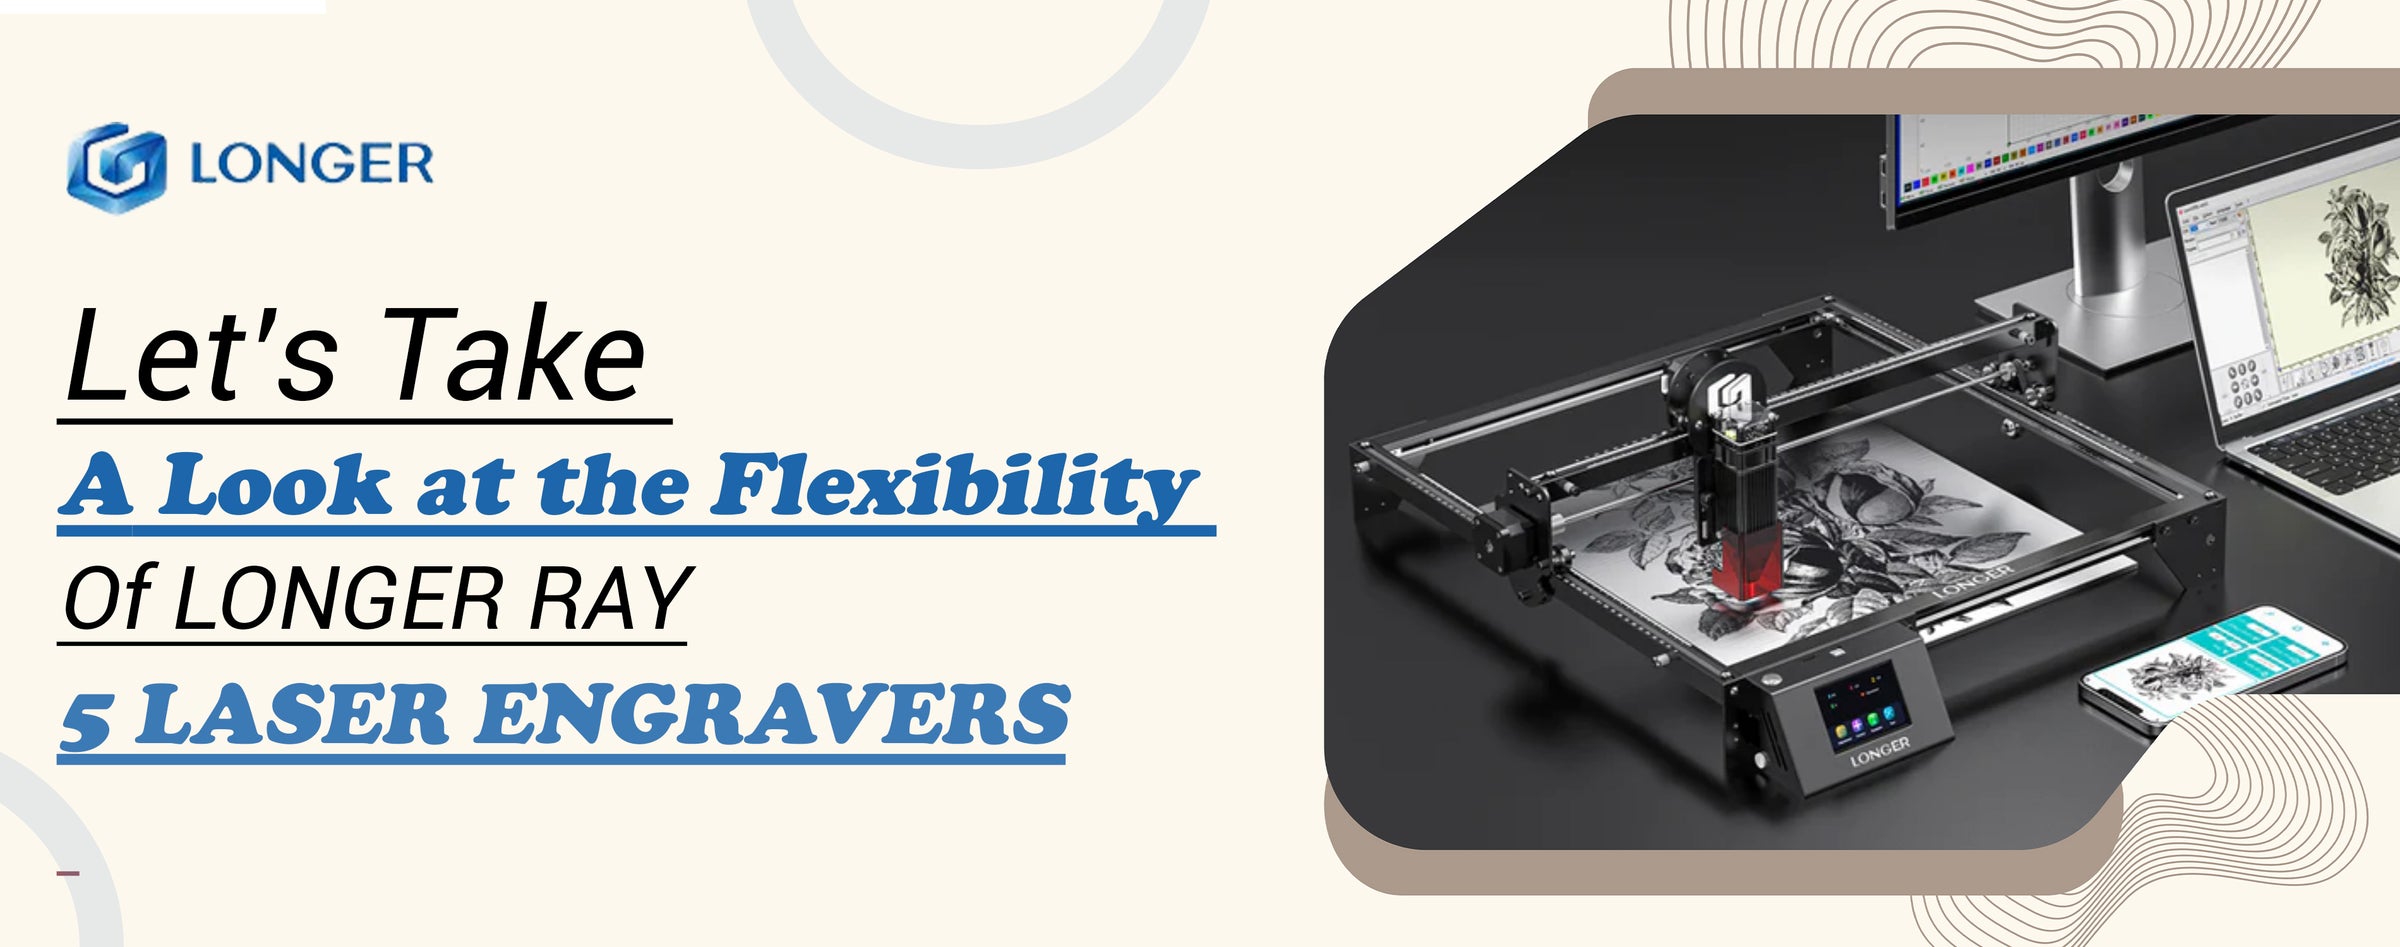 Let’s Take a Look at the Flexibility of LONGER RAY 5 Laser Engravers